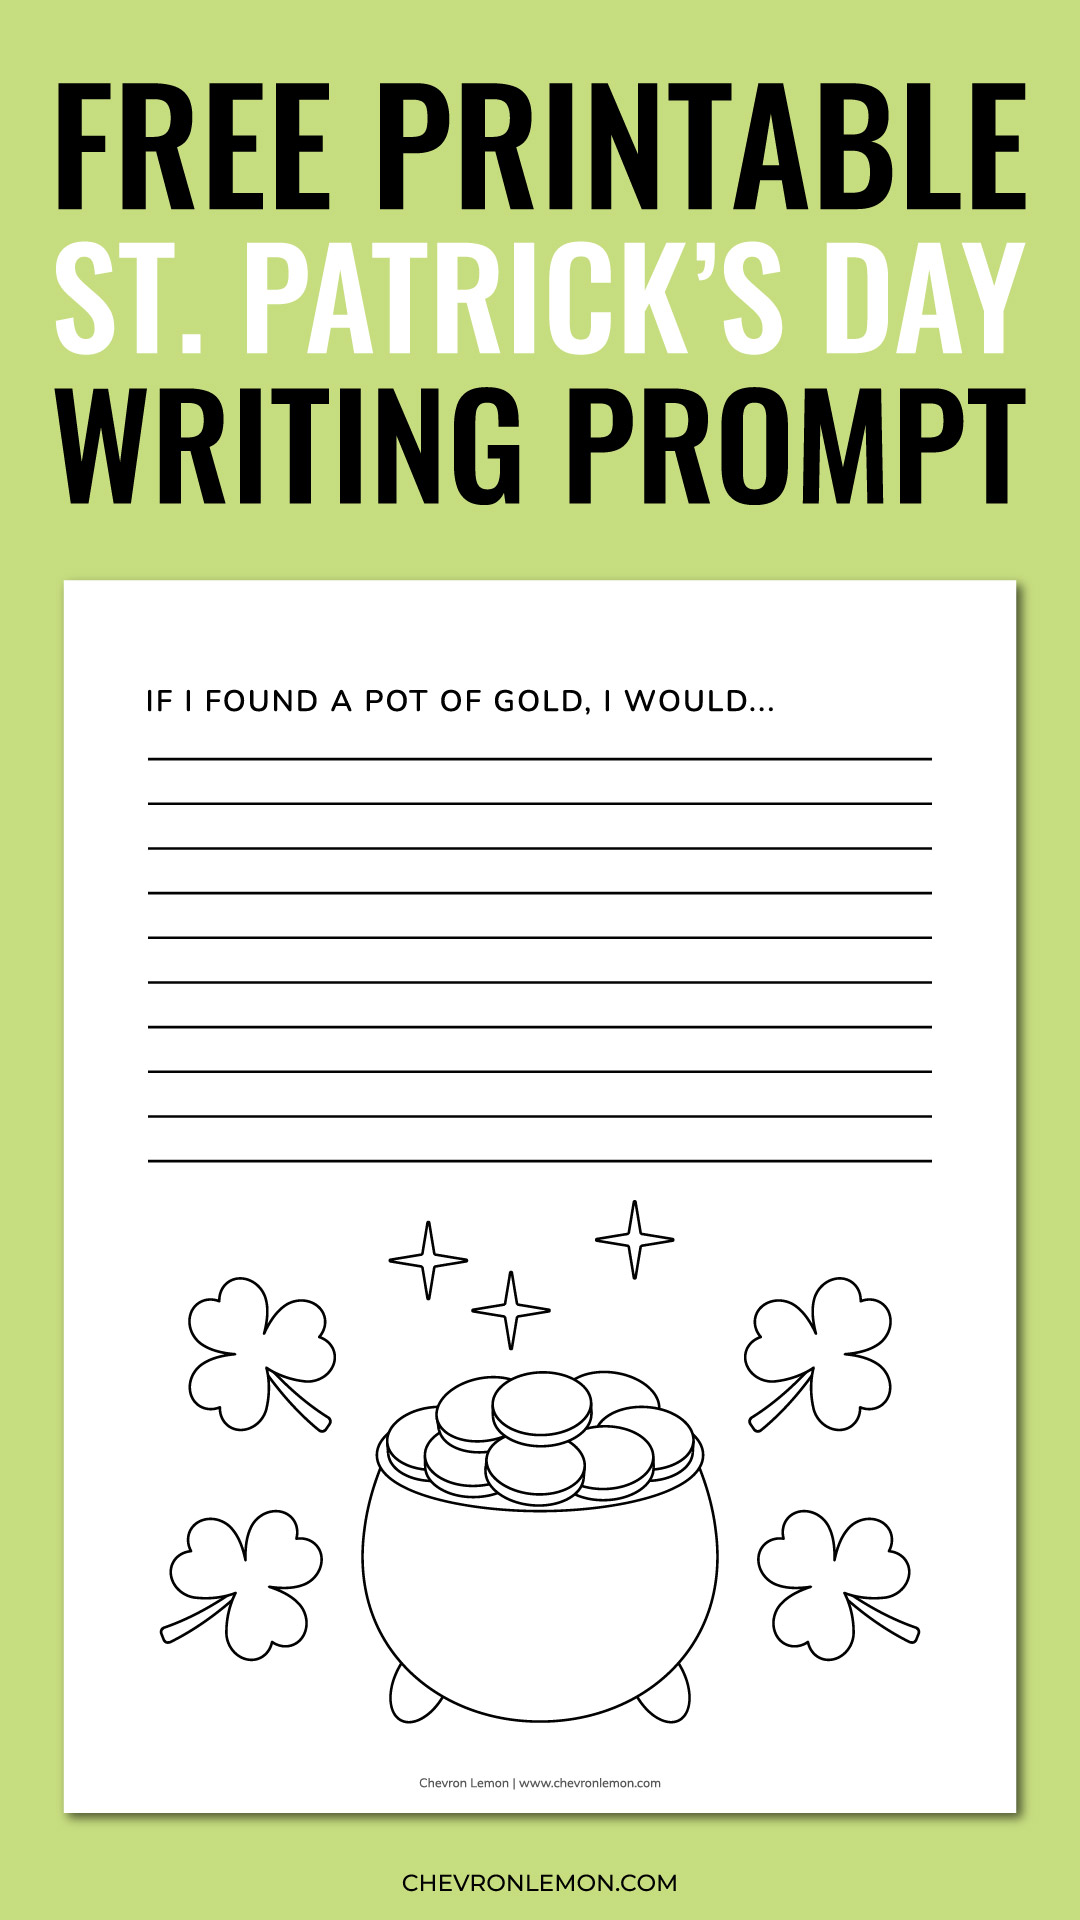 Printable St. Patrick's Day writing prompt